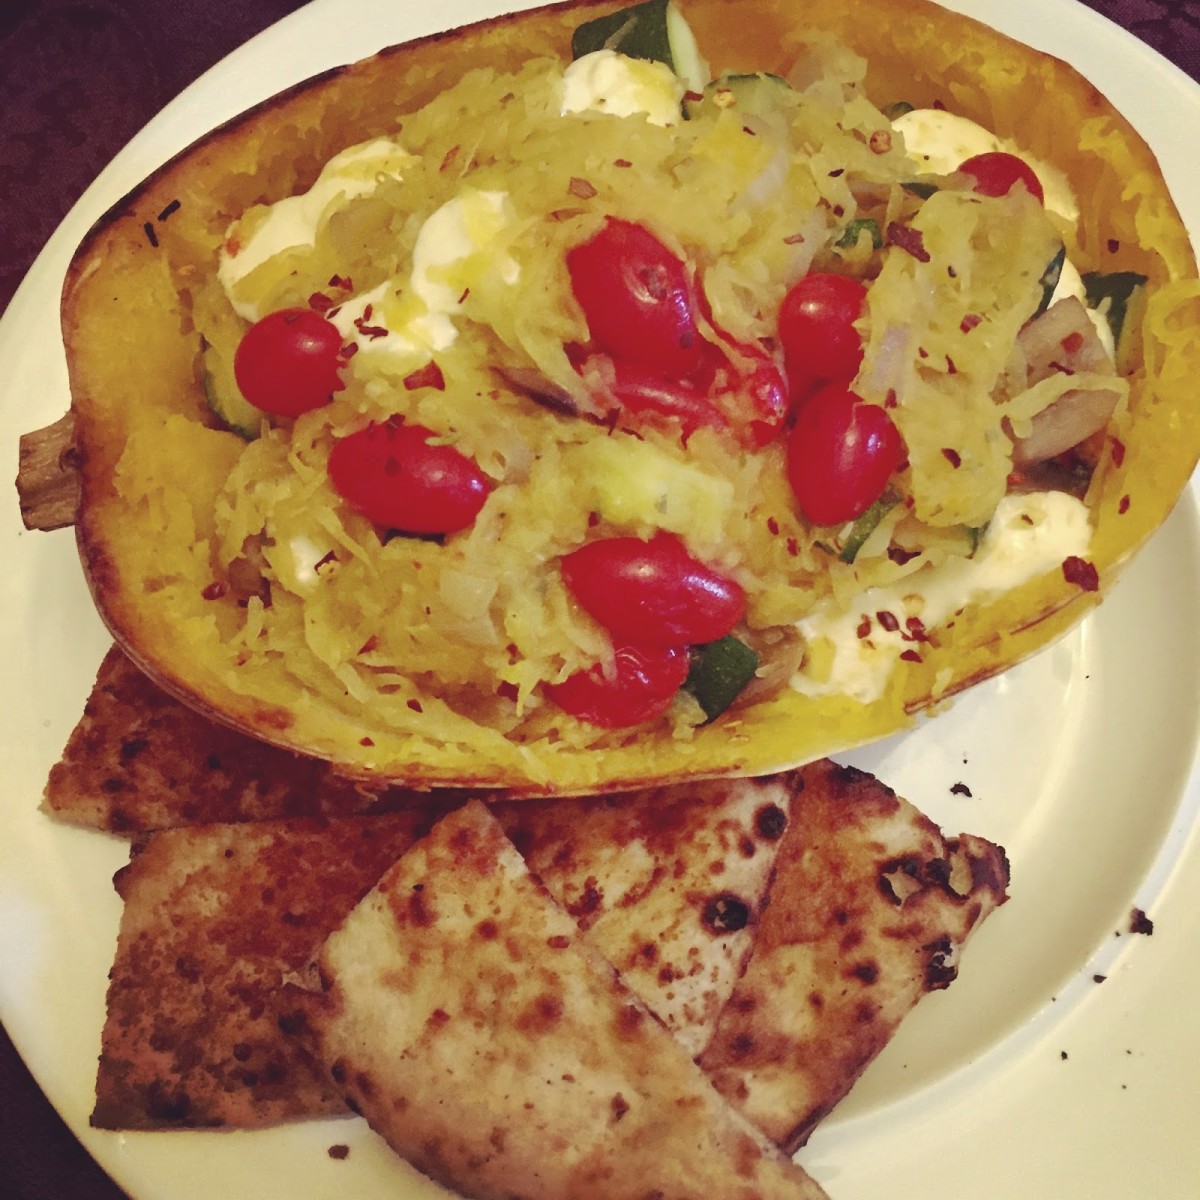 This paghetti squash with a side of flat bread makes a great weekday meal. 